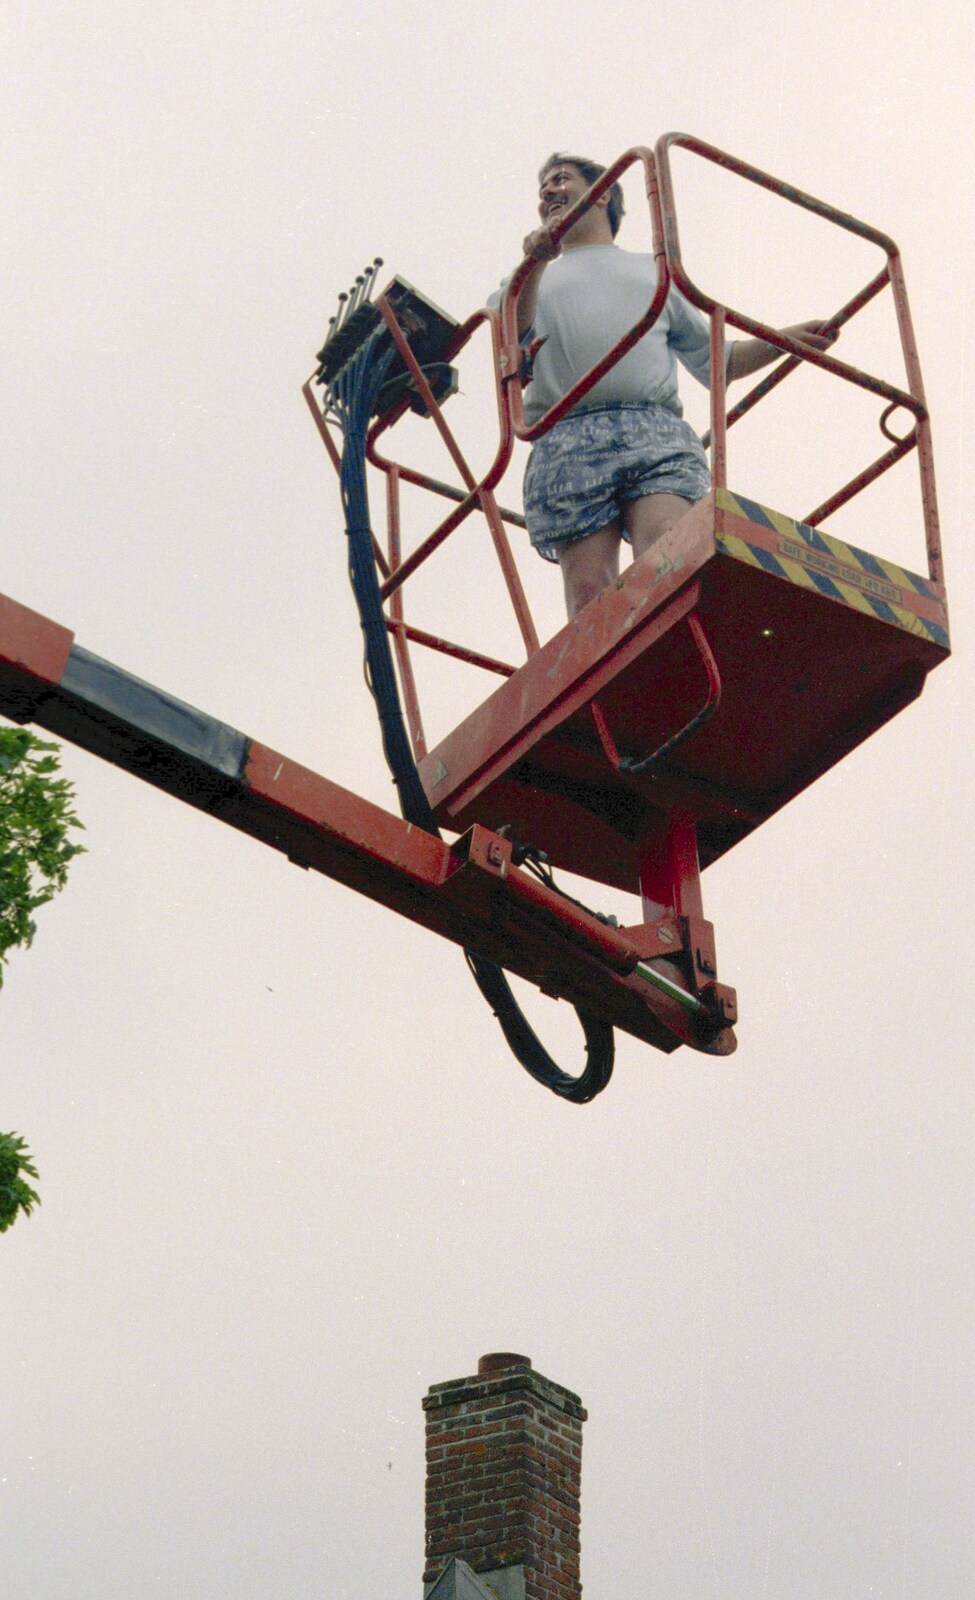 Local radio DJ David Hoffman is up in the air from The Election Caravan and a View from a Cherry Picker, Stuston, Suffolk - 9th April 1992